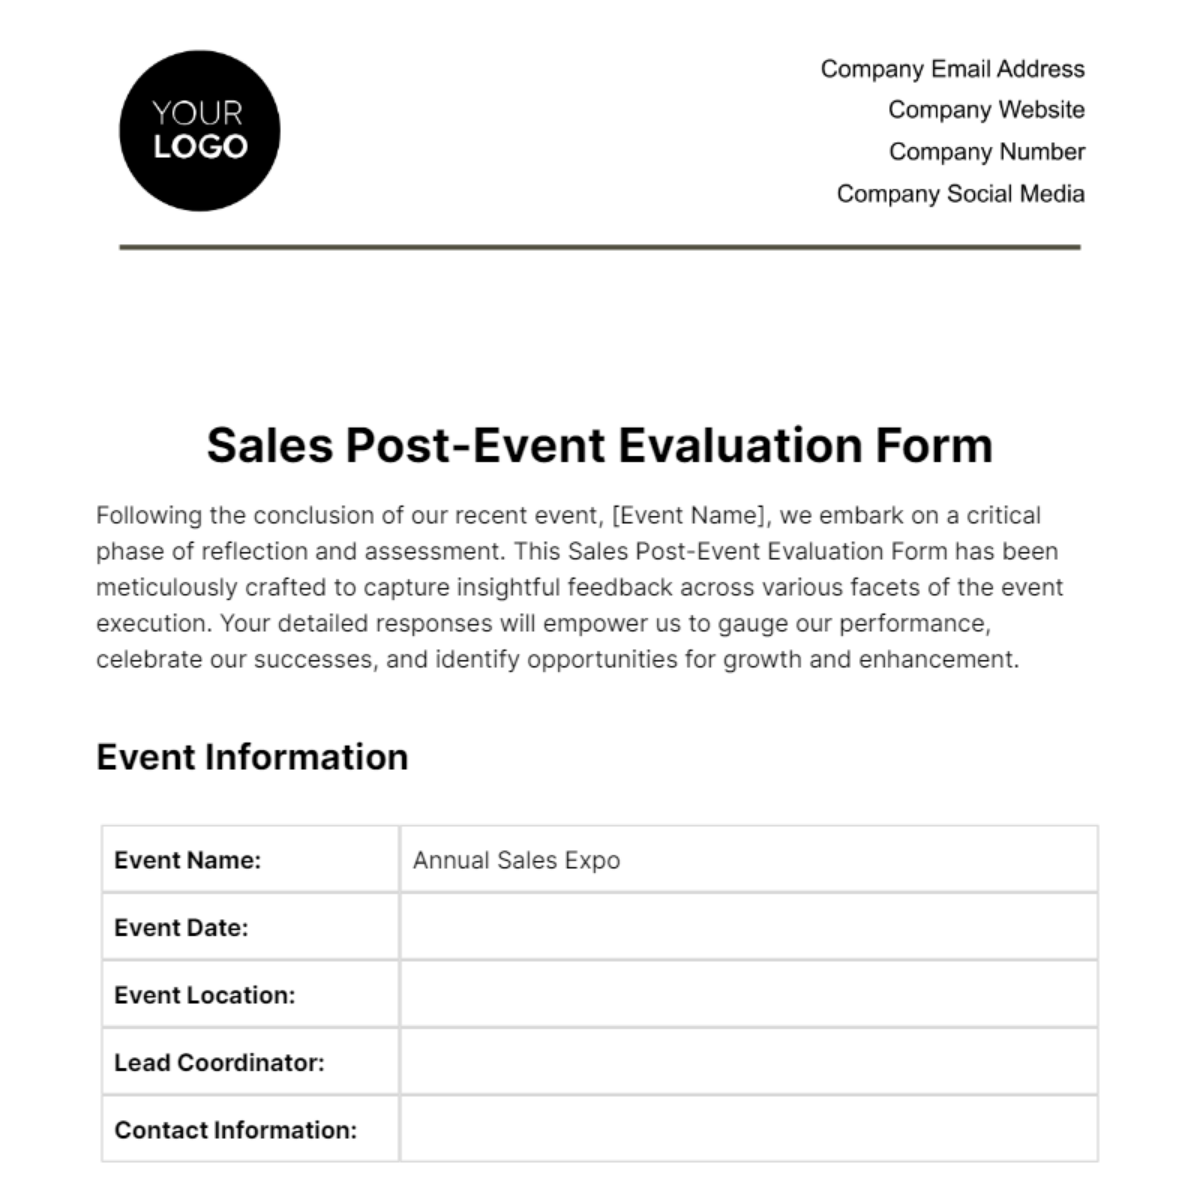 Sales Post-Event Evaluation Form Template